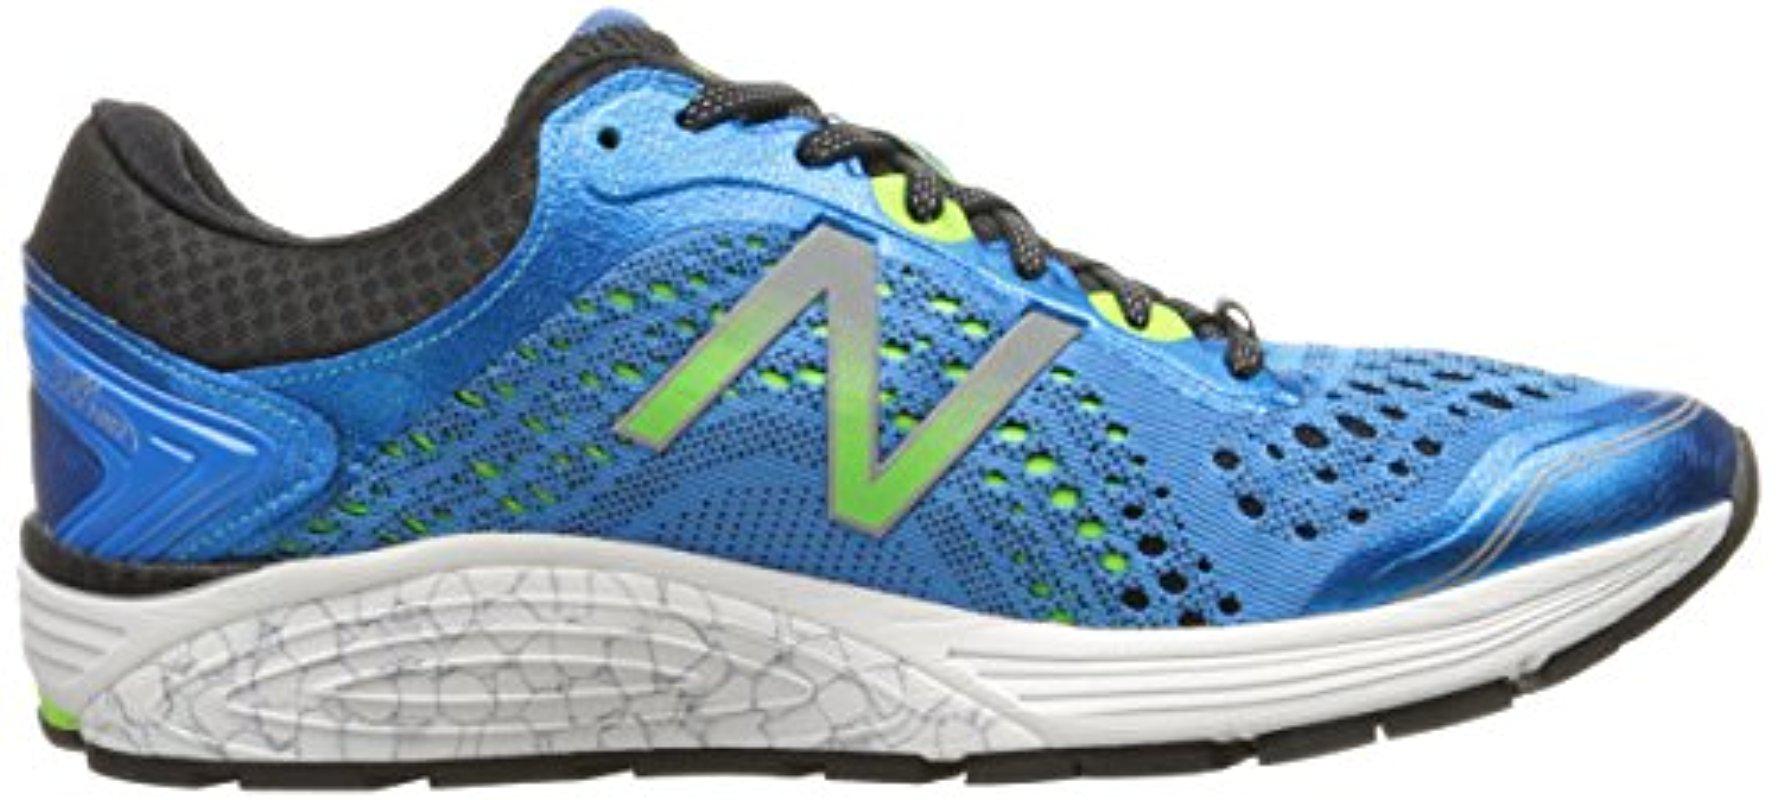 New Balance Synthetic Fuelcell 1260 V7 Running Shoe in Blue for Men - Lyst